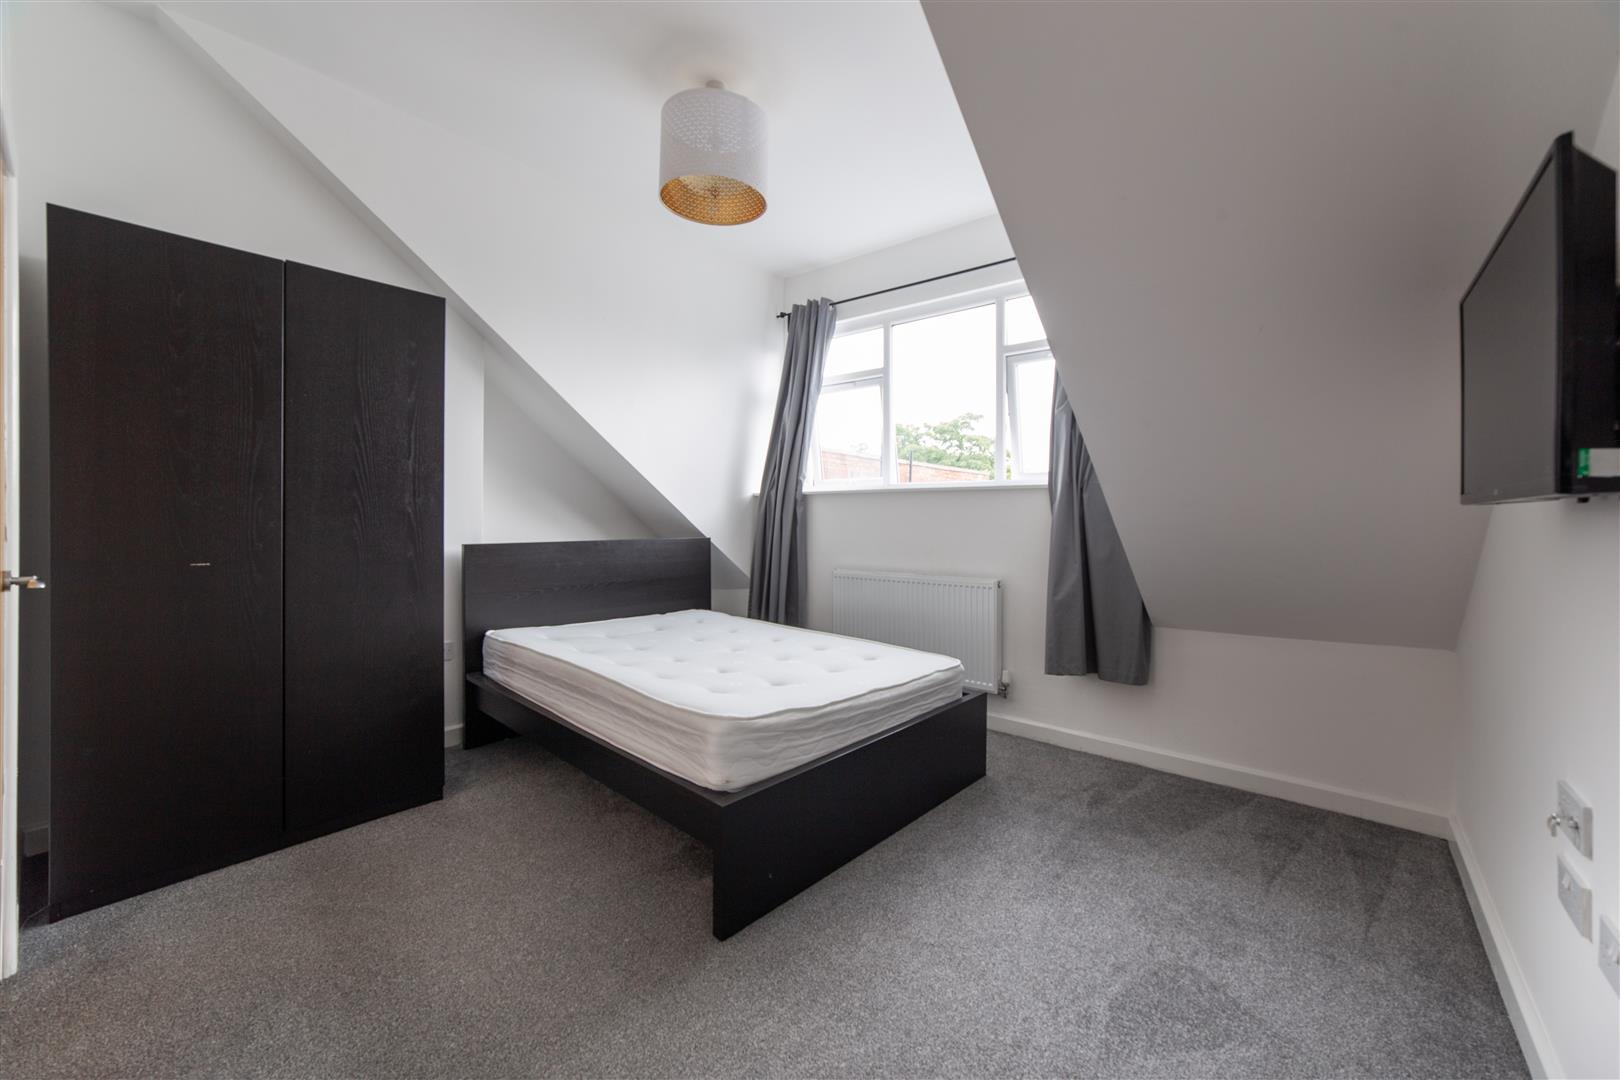 5 bed apartment to rent in Osborne Road, Newcastle Upon Tyne 14